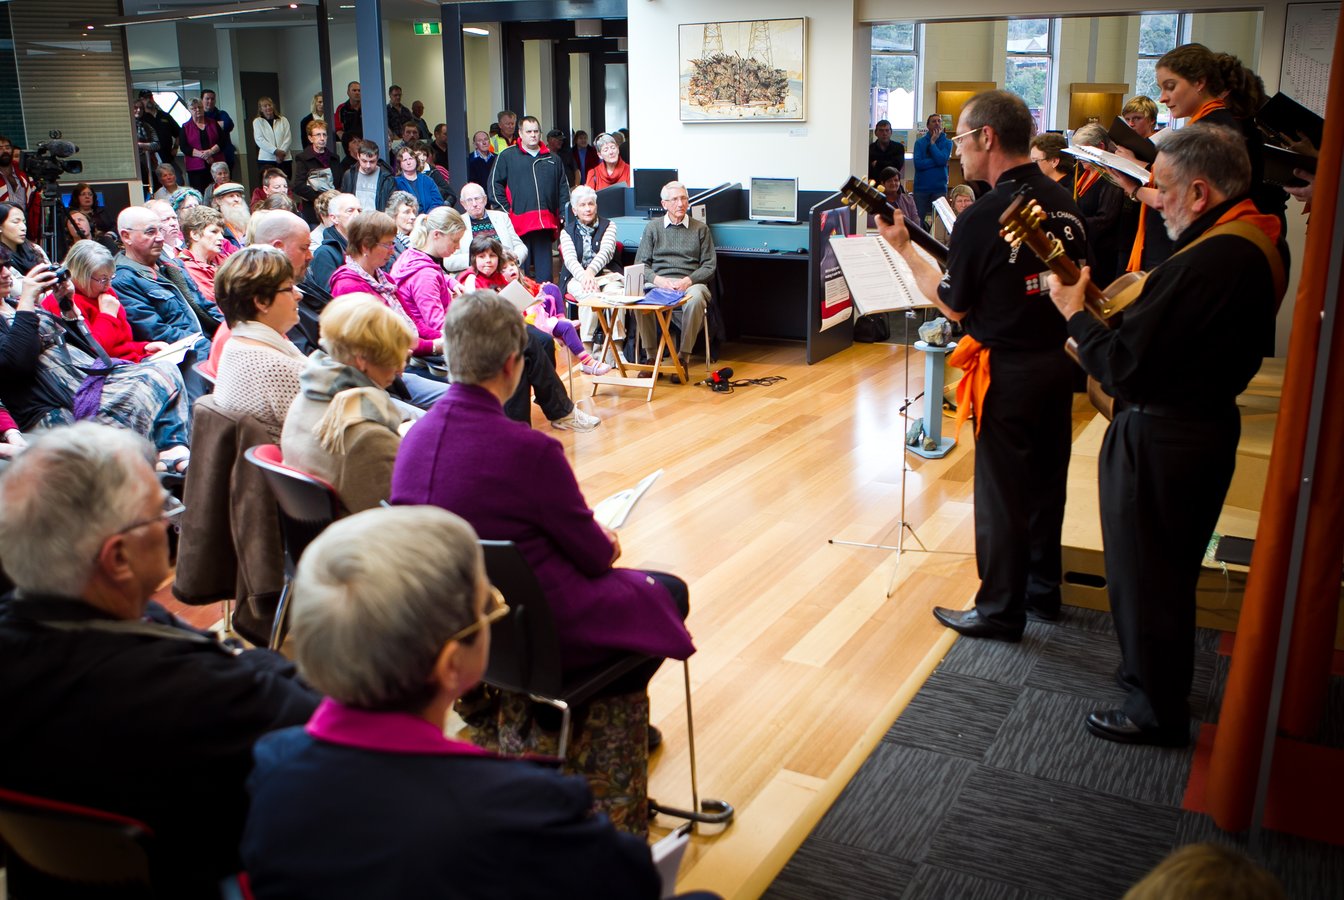 A photo of the West Coast Choir performing to an audience 2012, credit Kim Eijdenberg